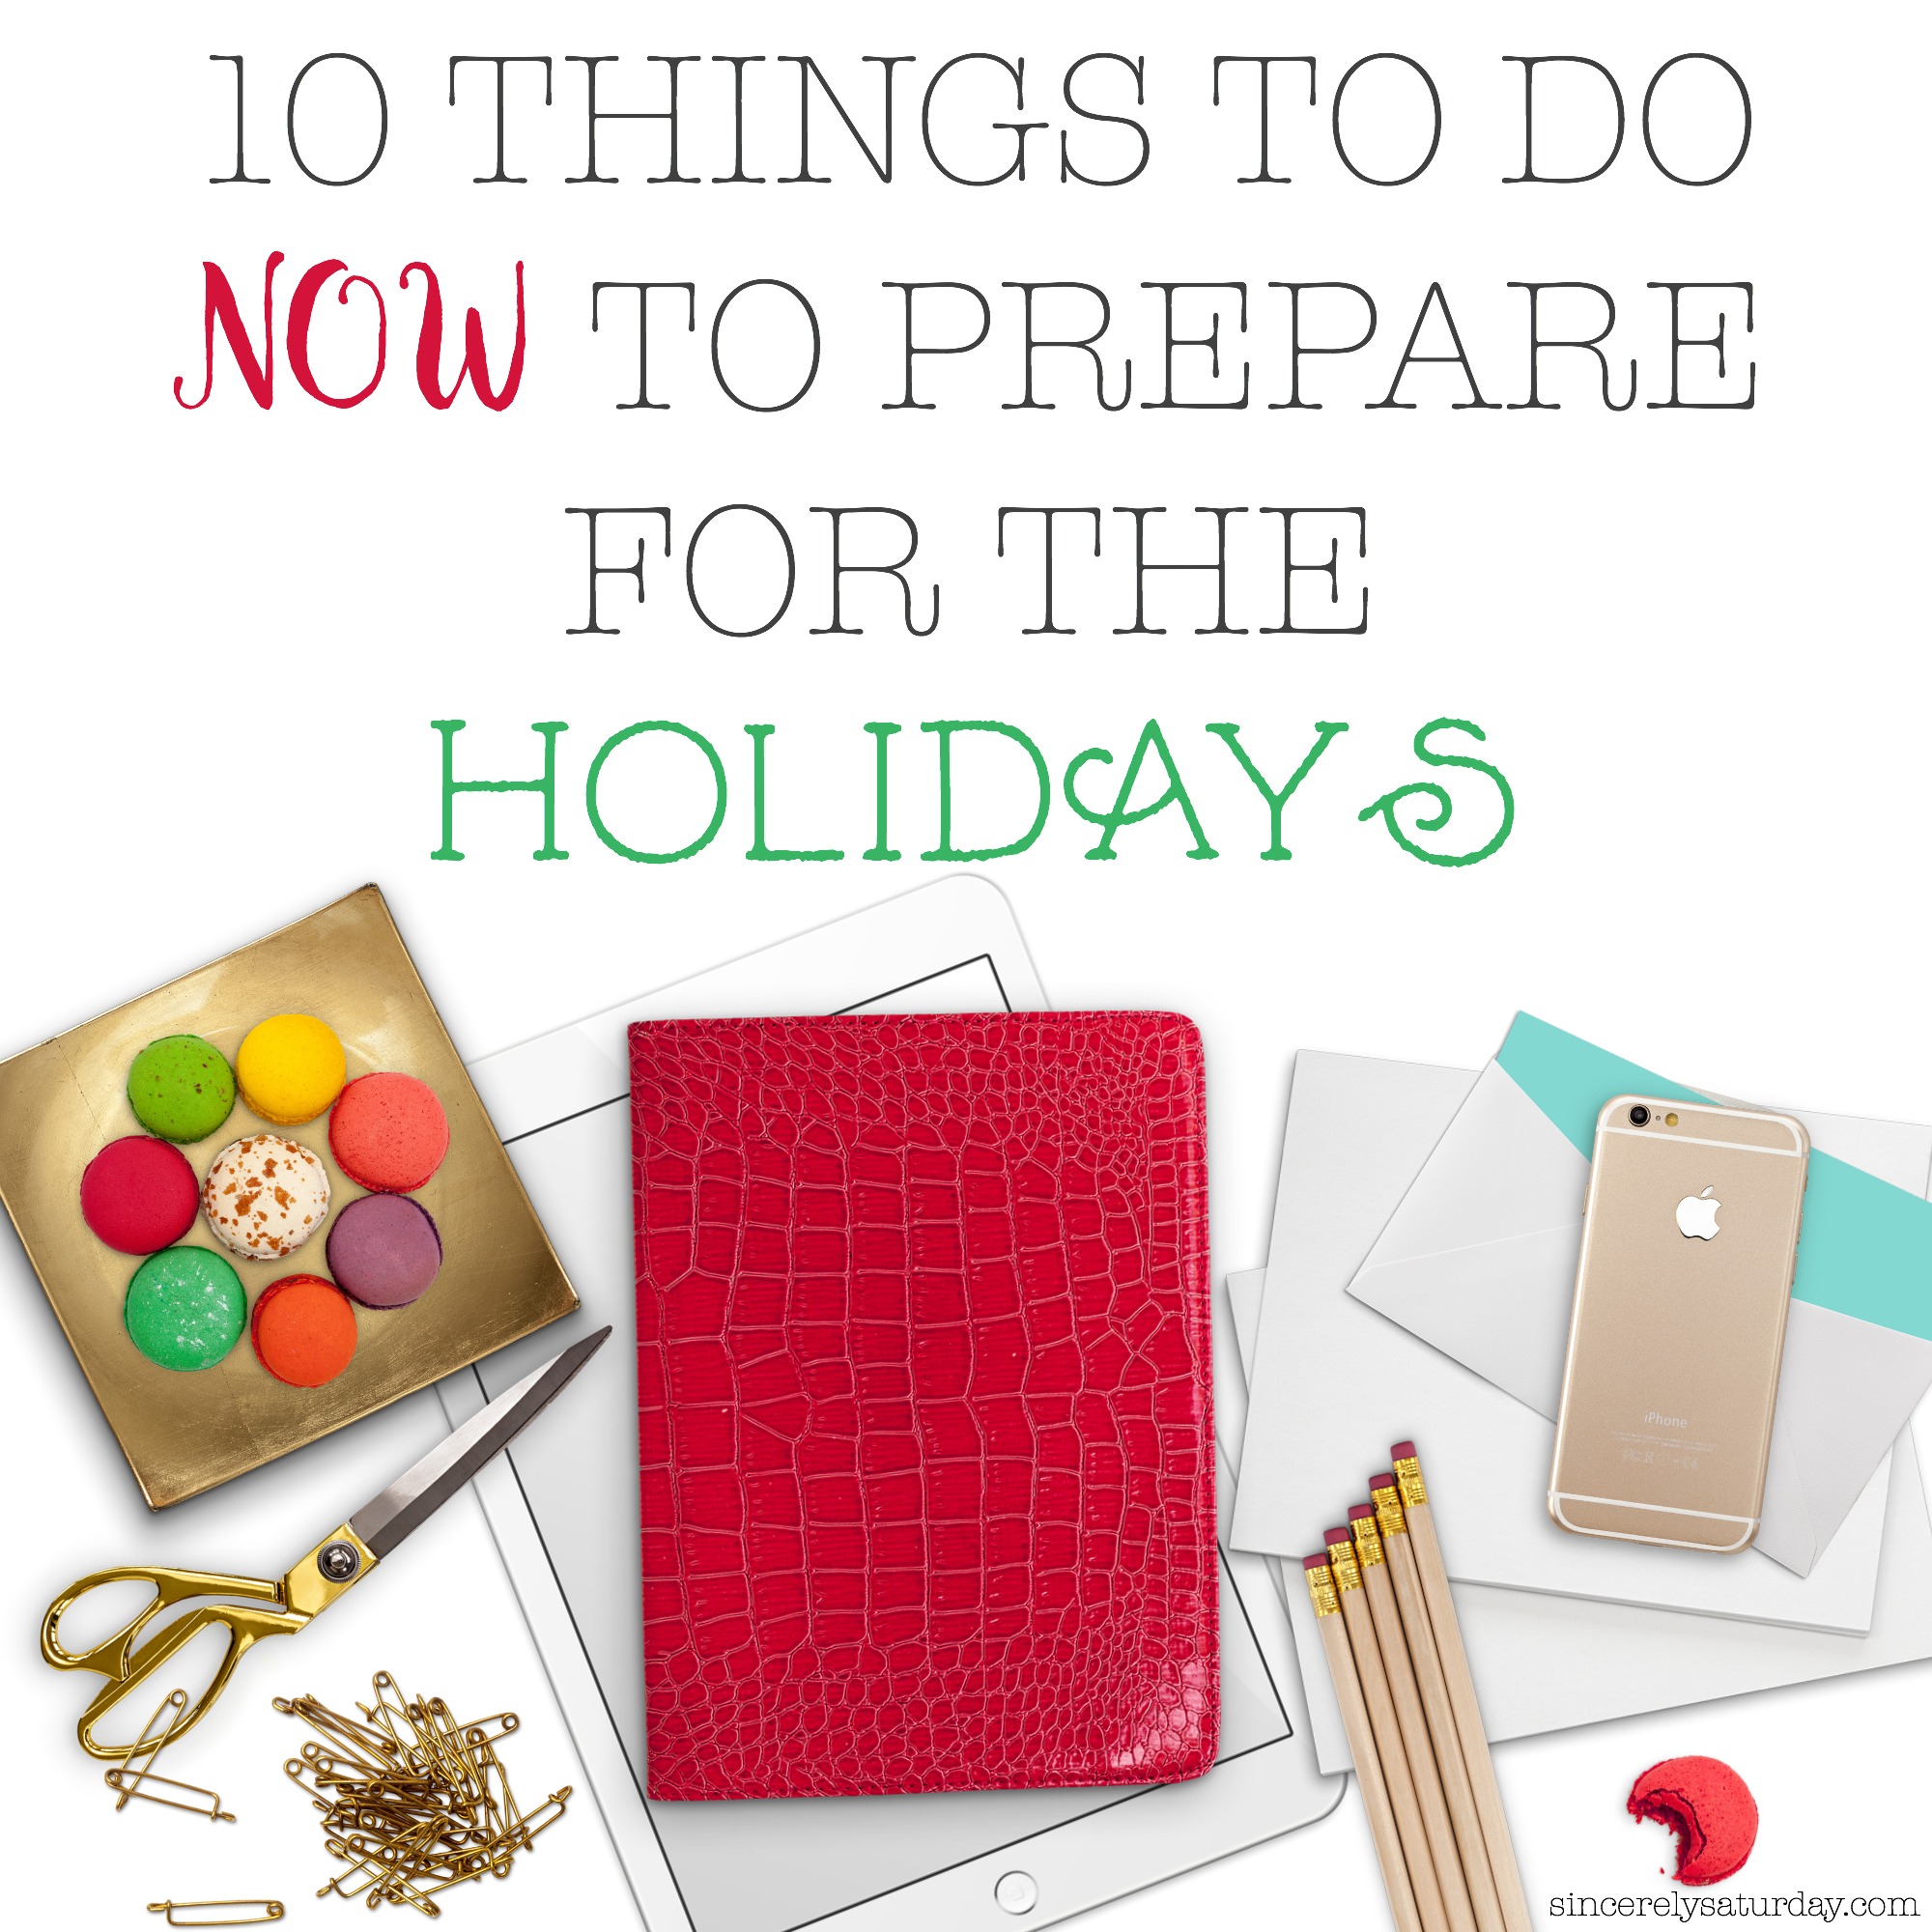 10 things to do now to prepare for the holidays